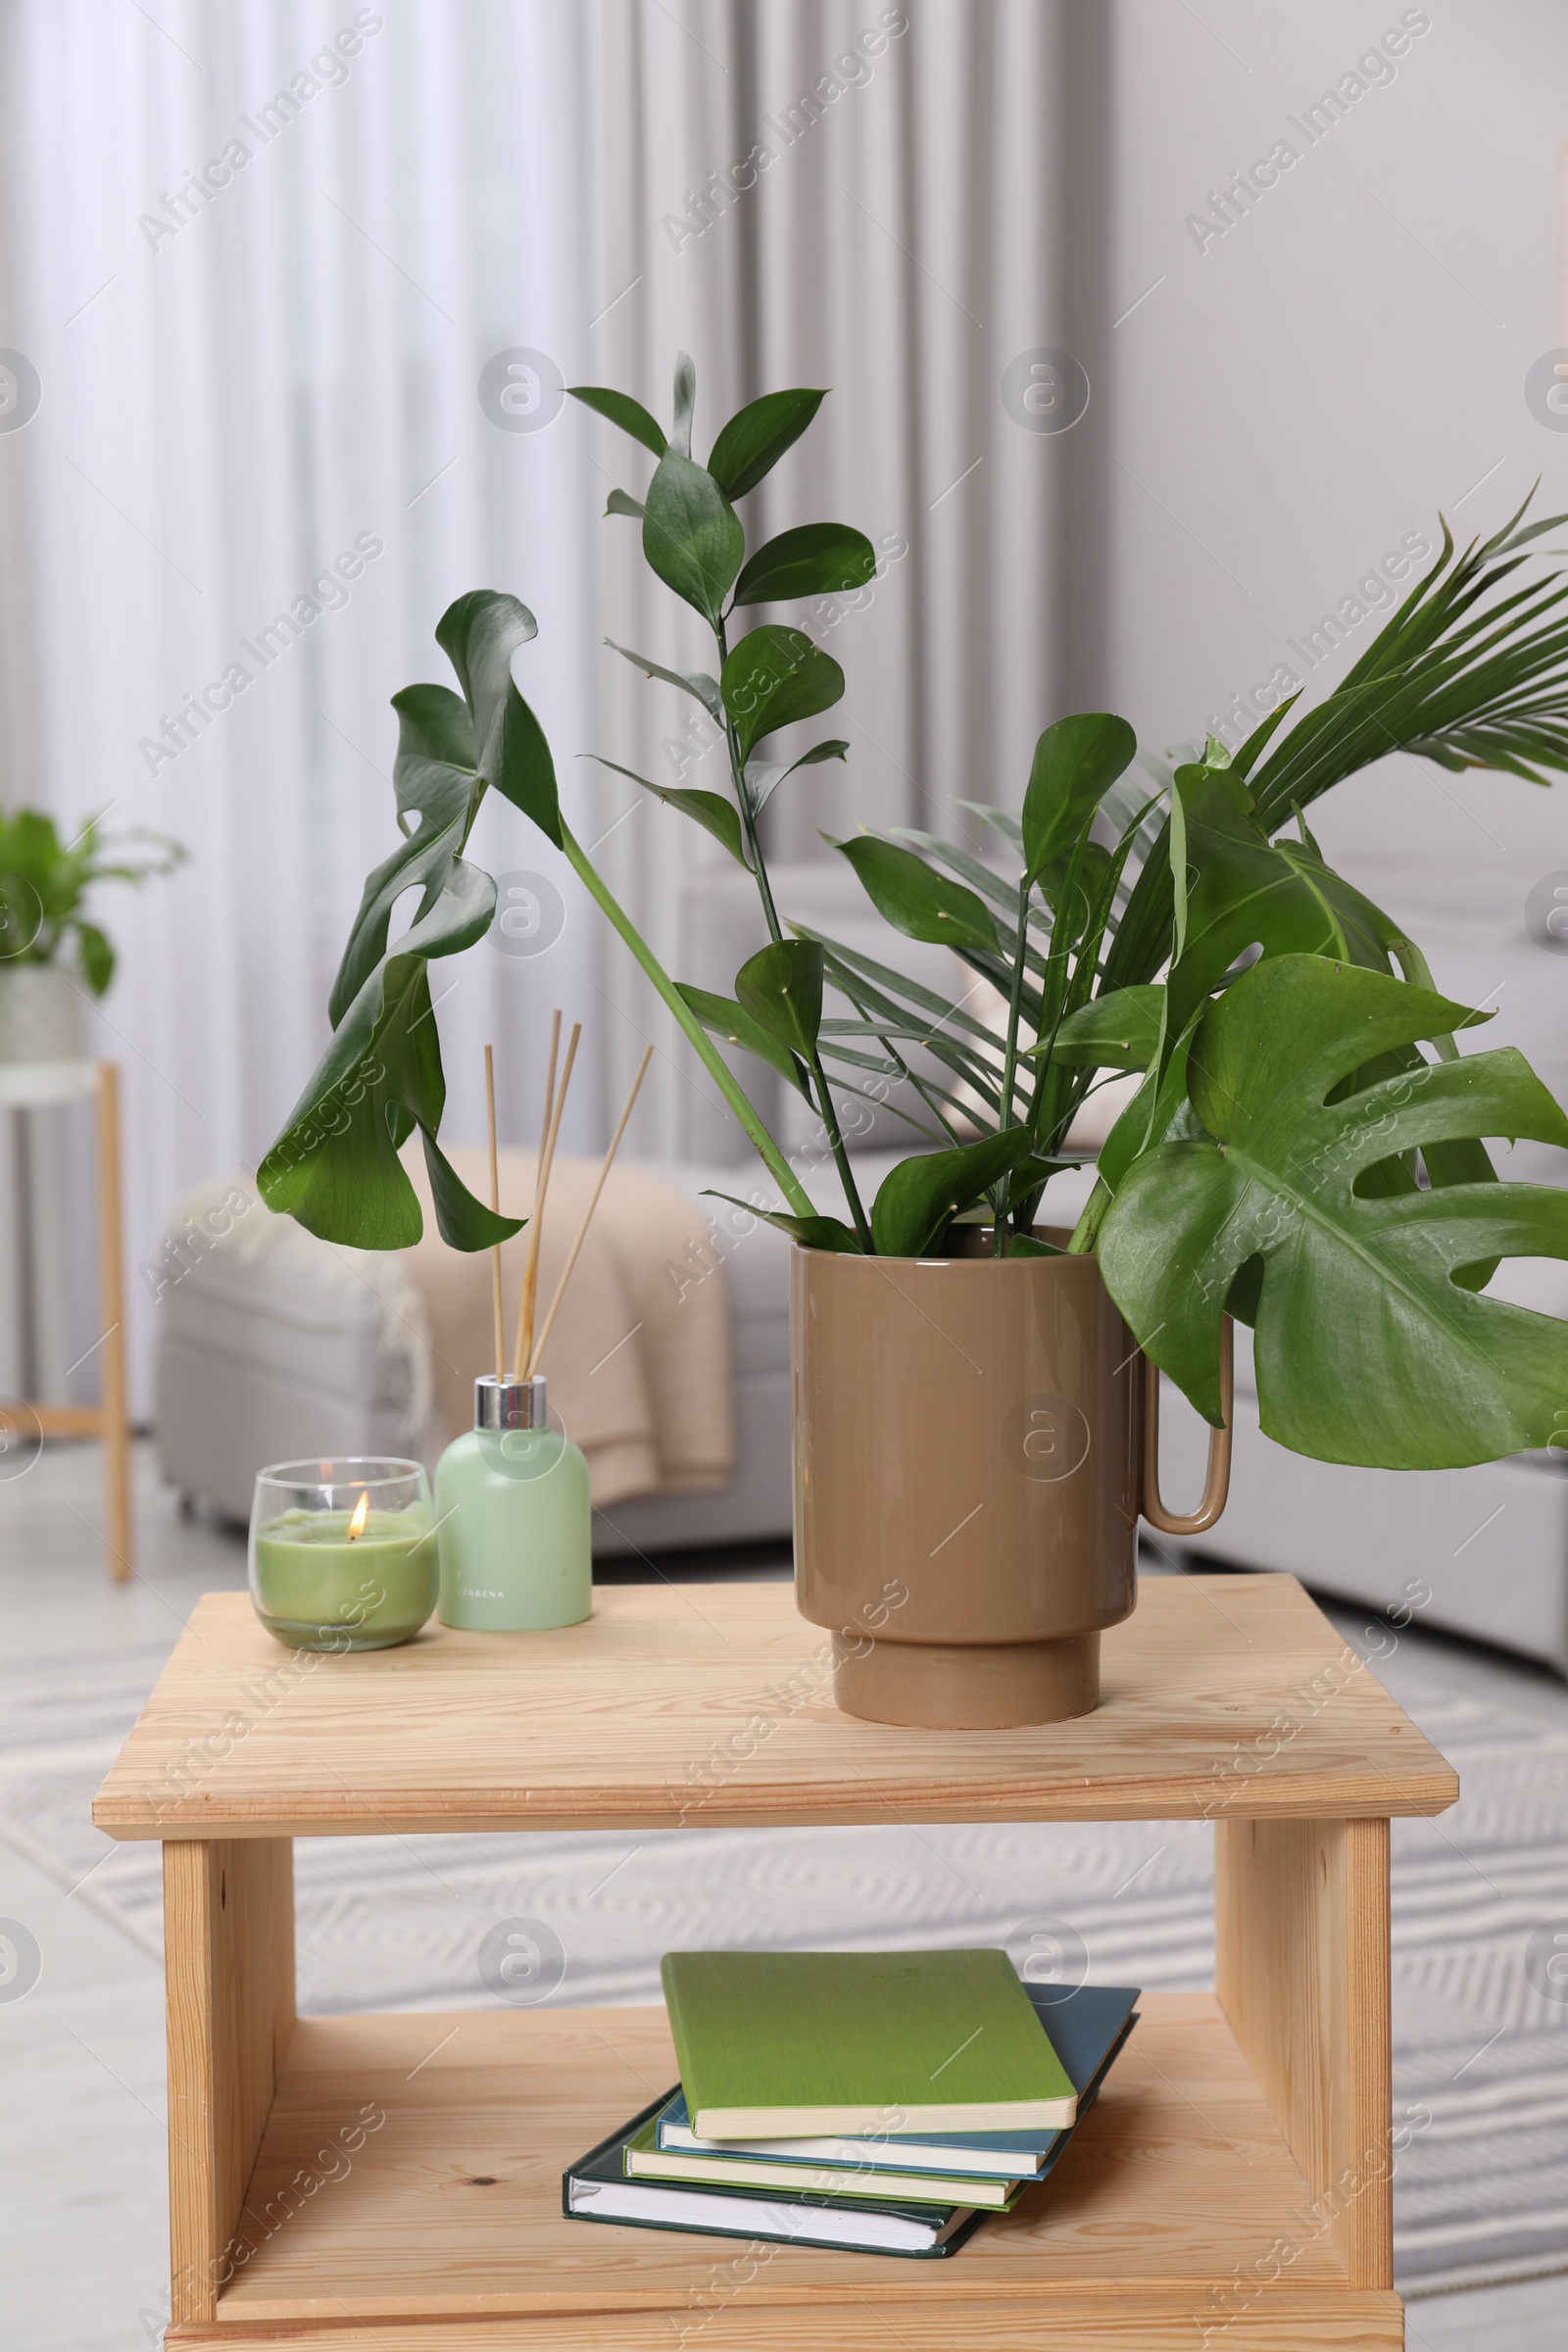 Photo of Ceramic vase with tropical leaves on wooden table in living room